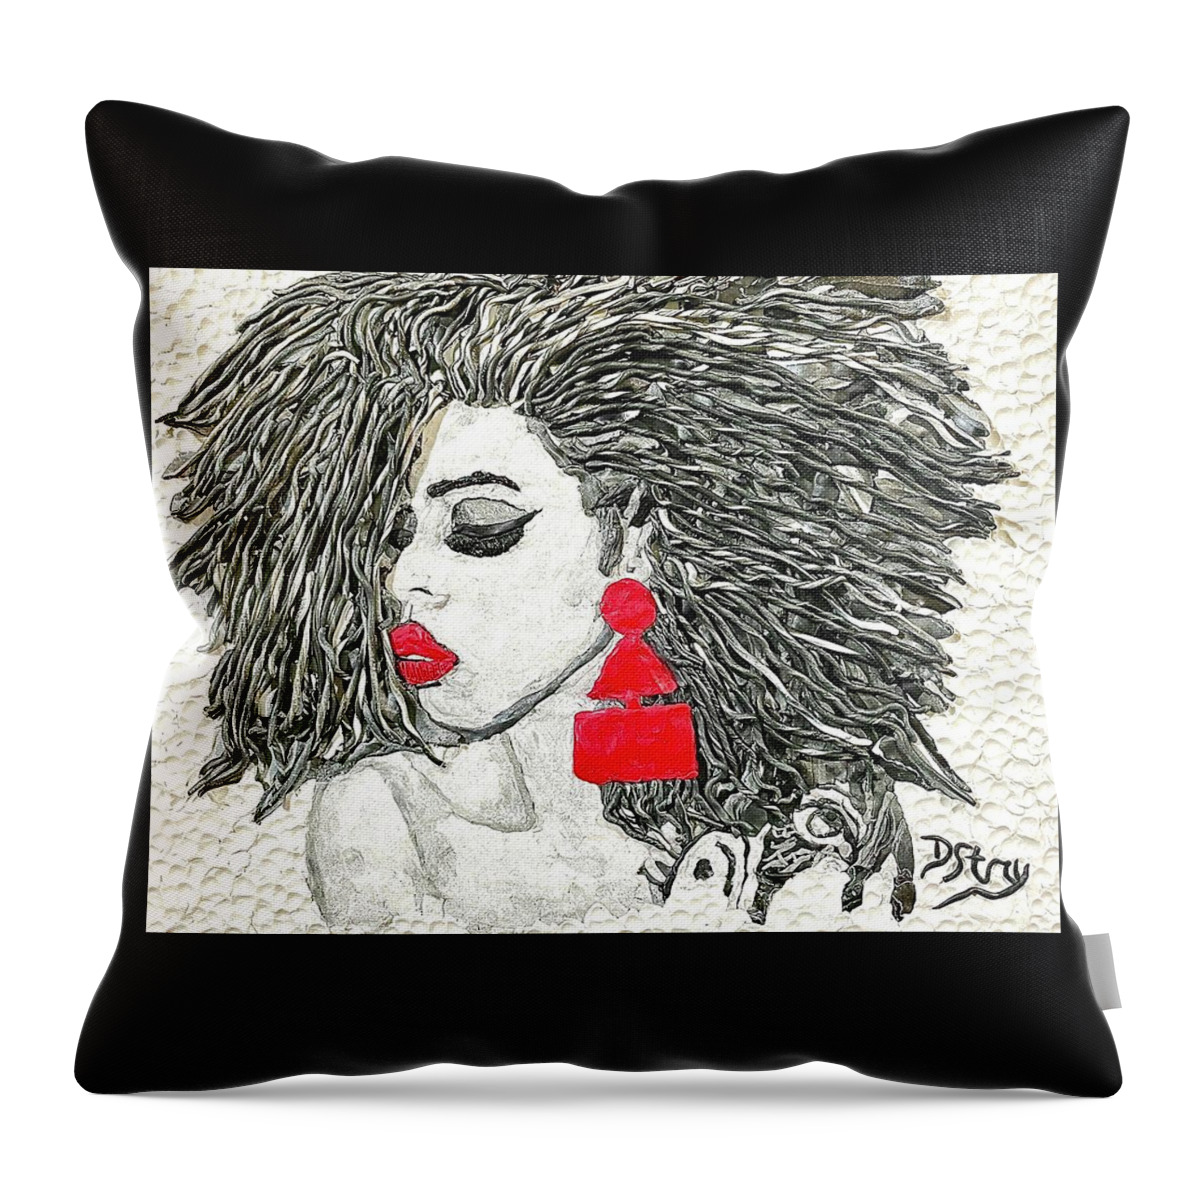 Polymer Clay Throw Pillow featuring the mixed media Untamed Beauty by Deborah Stanley